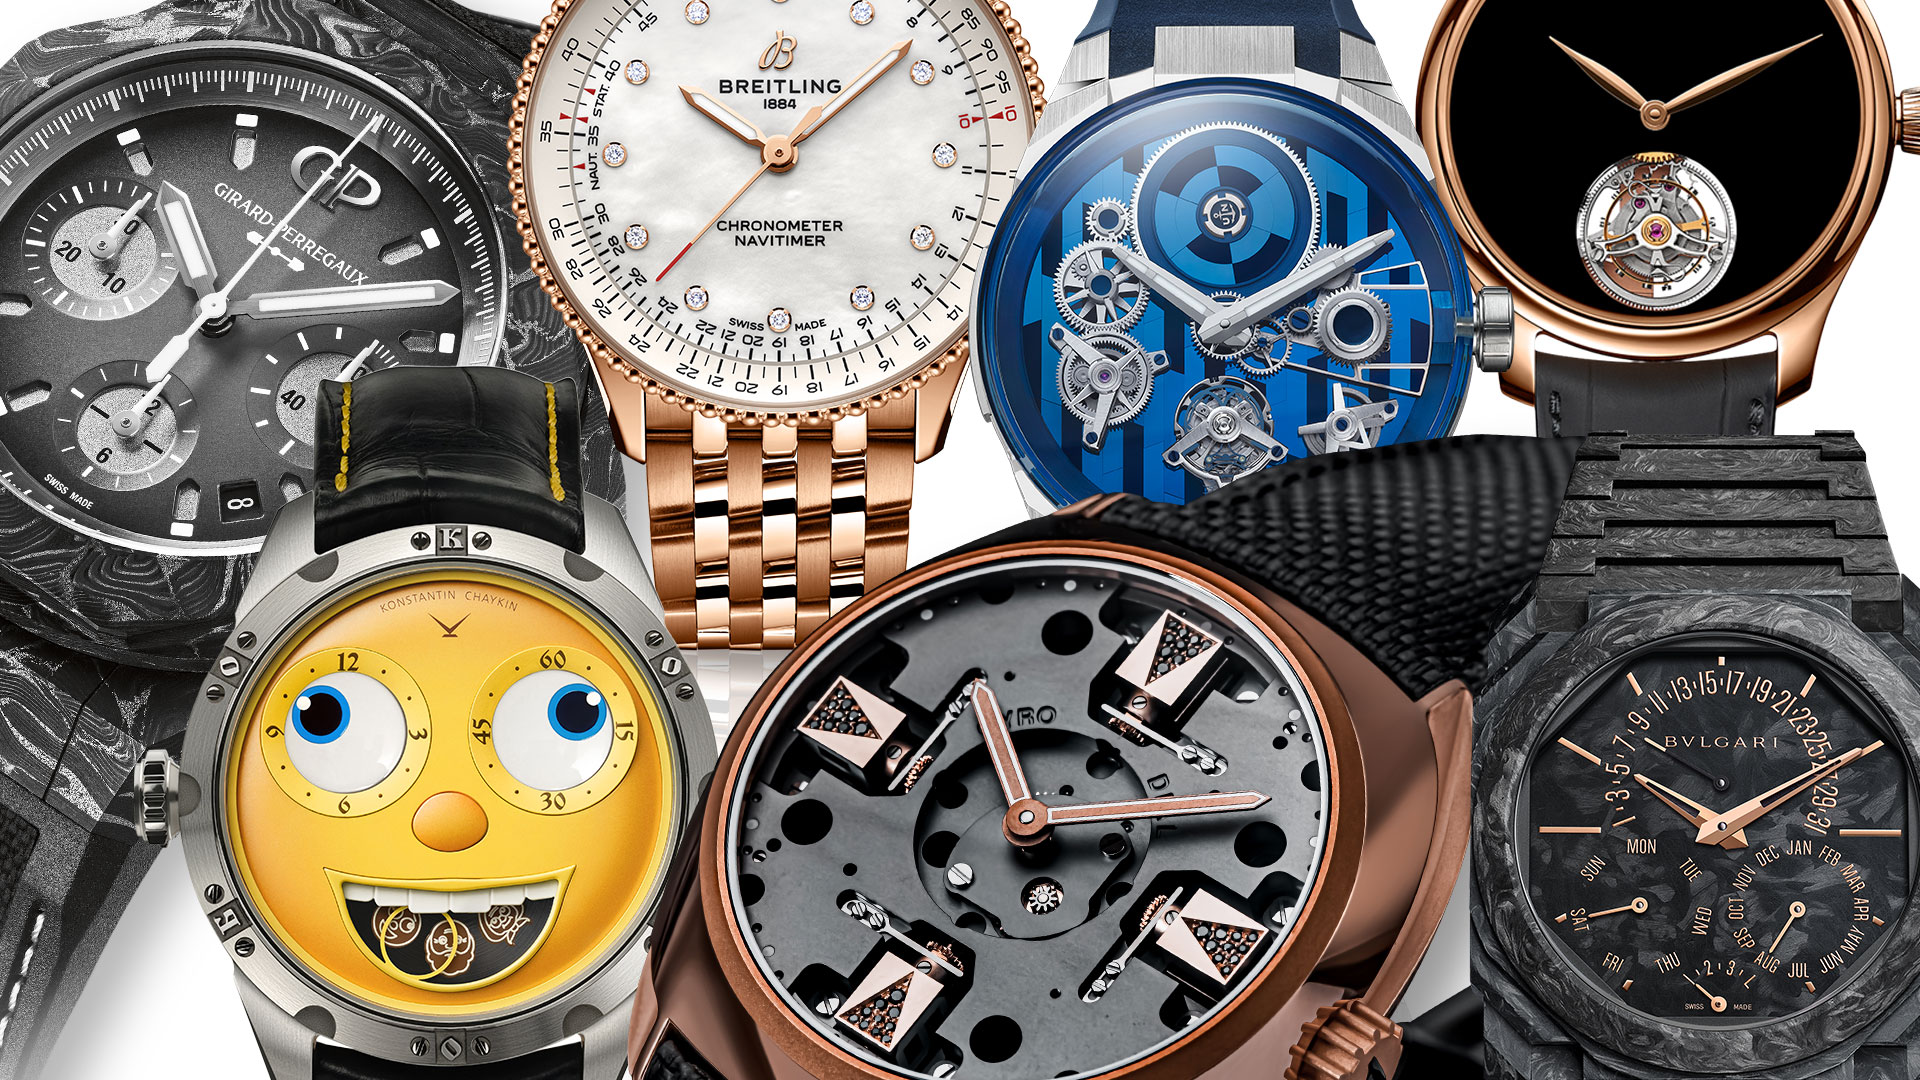 Swiss Precision: Geneva Watch Days allows Switzerland’s smaller names their day in the sun